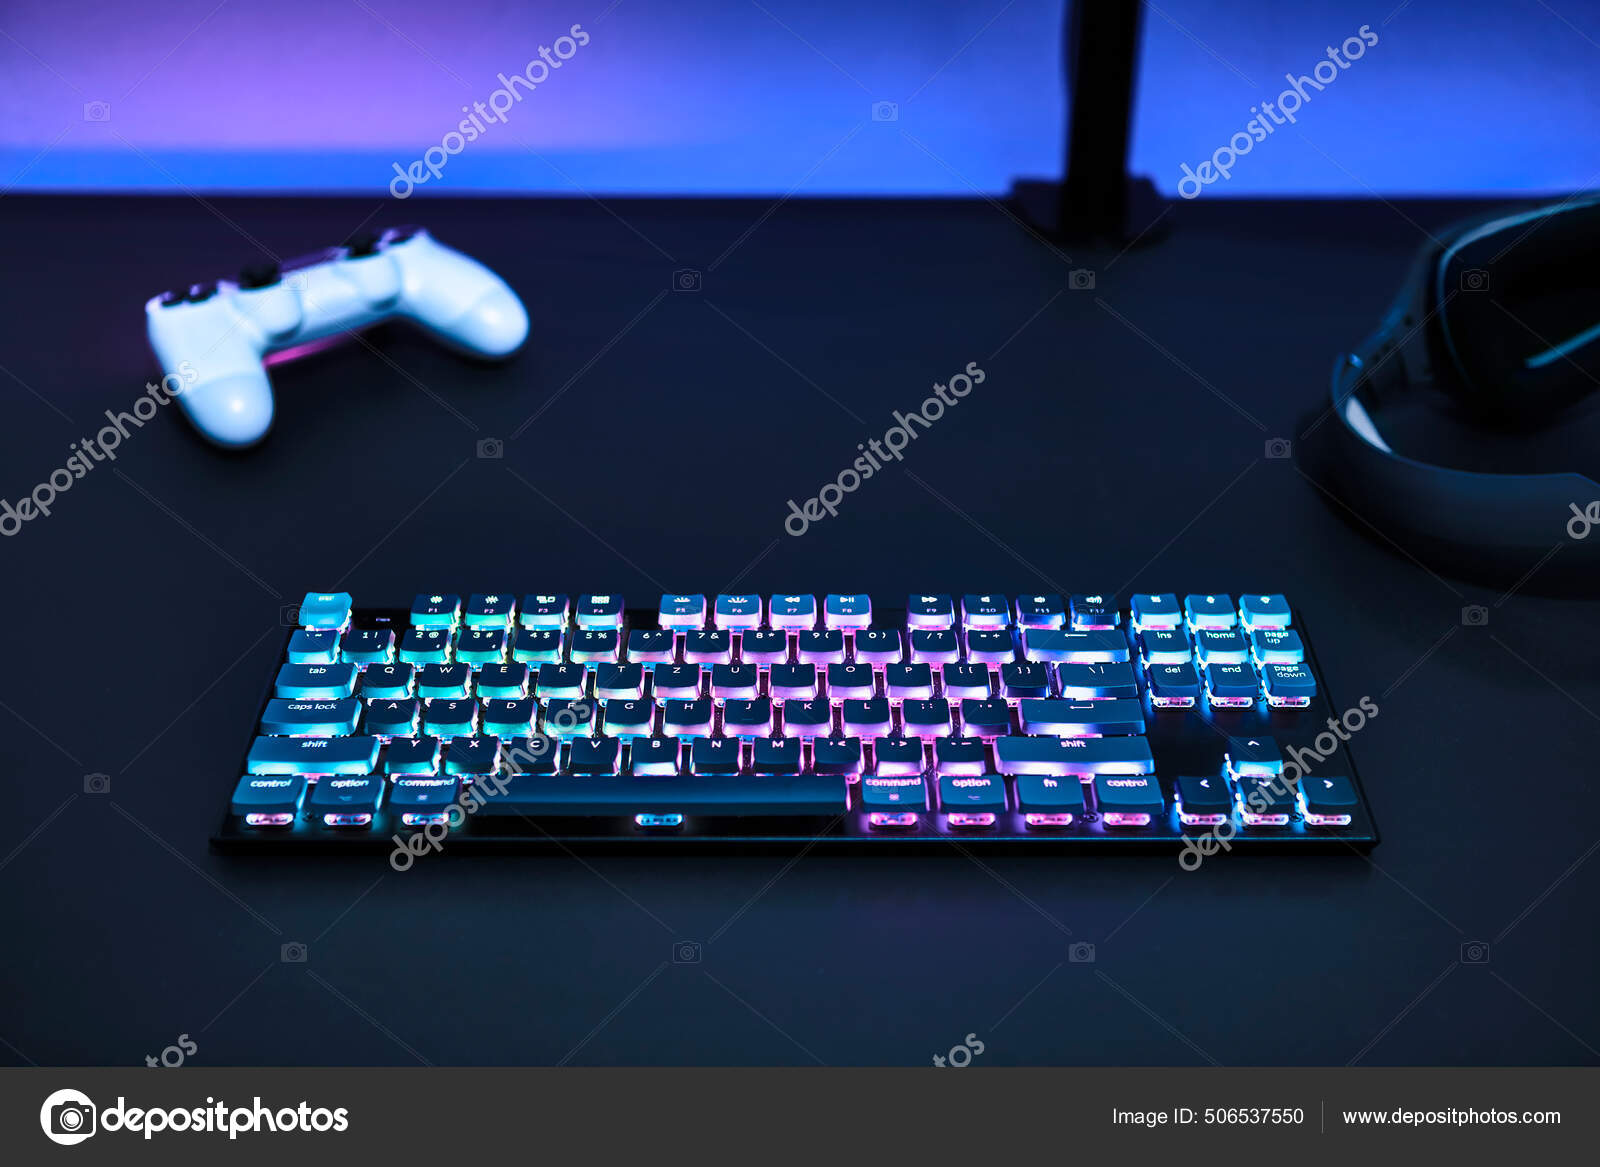 Colorful Gaming Accessories